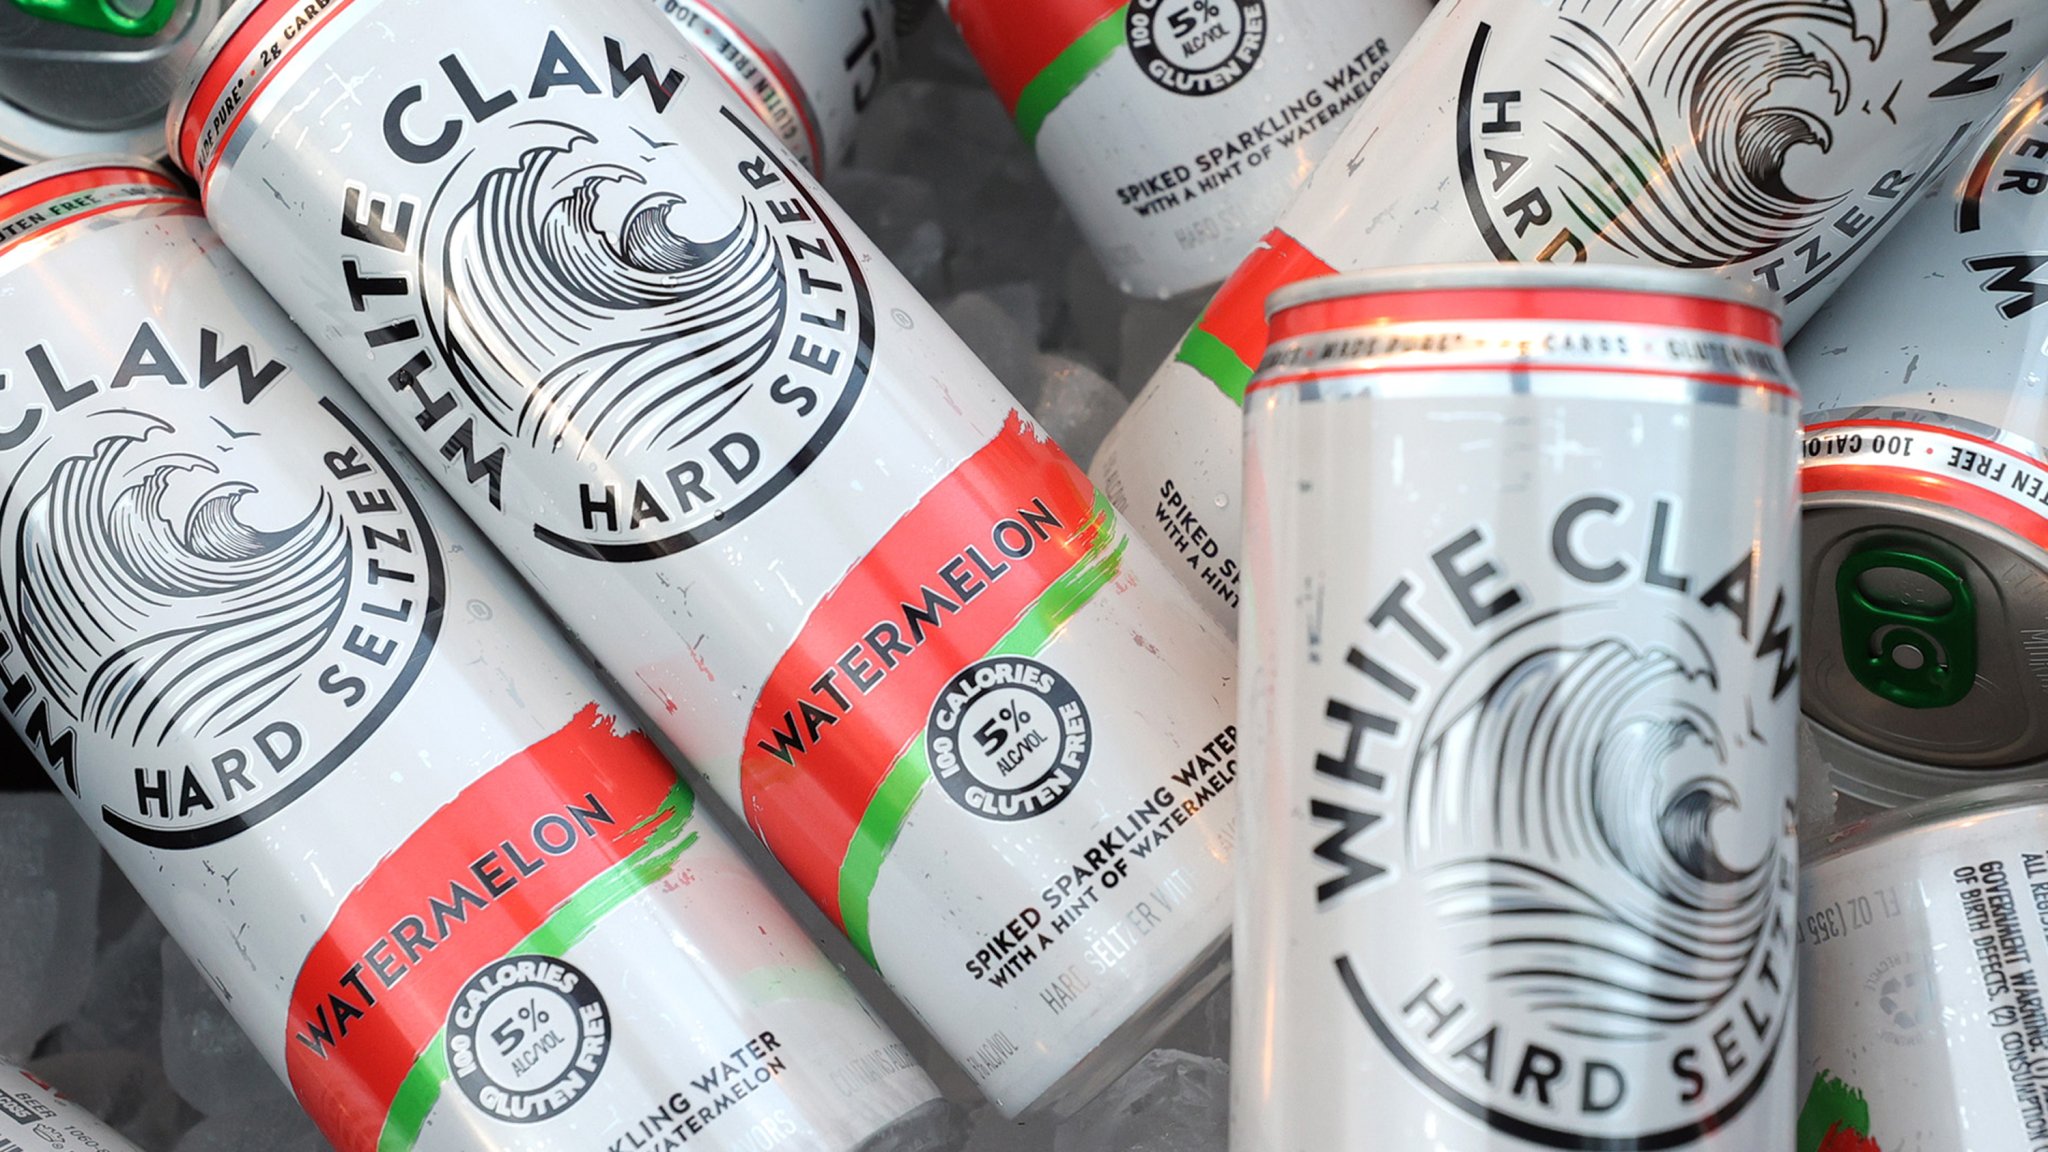 White Claw Is Getting Into The Vodka Game And Some Big Changes Could Be Coming